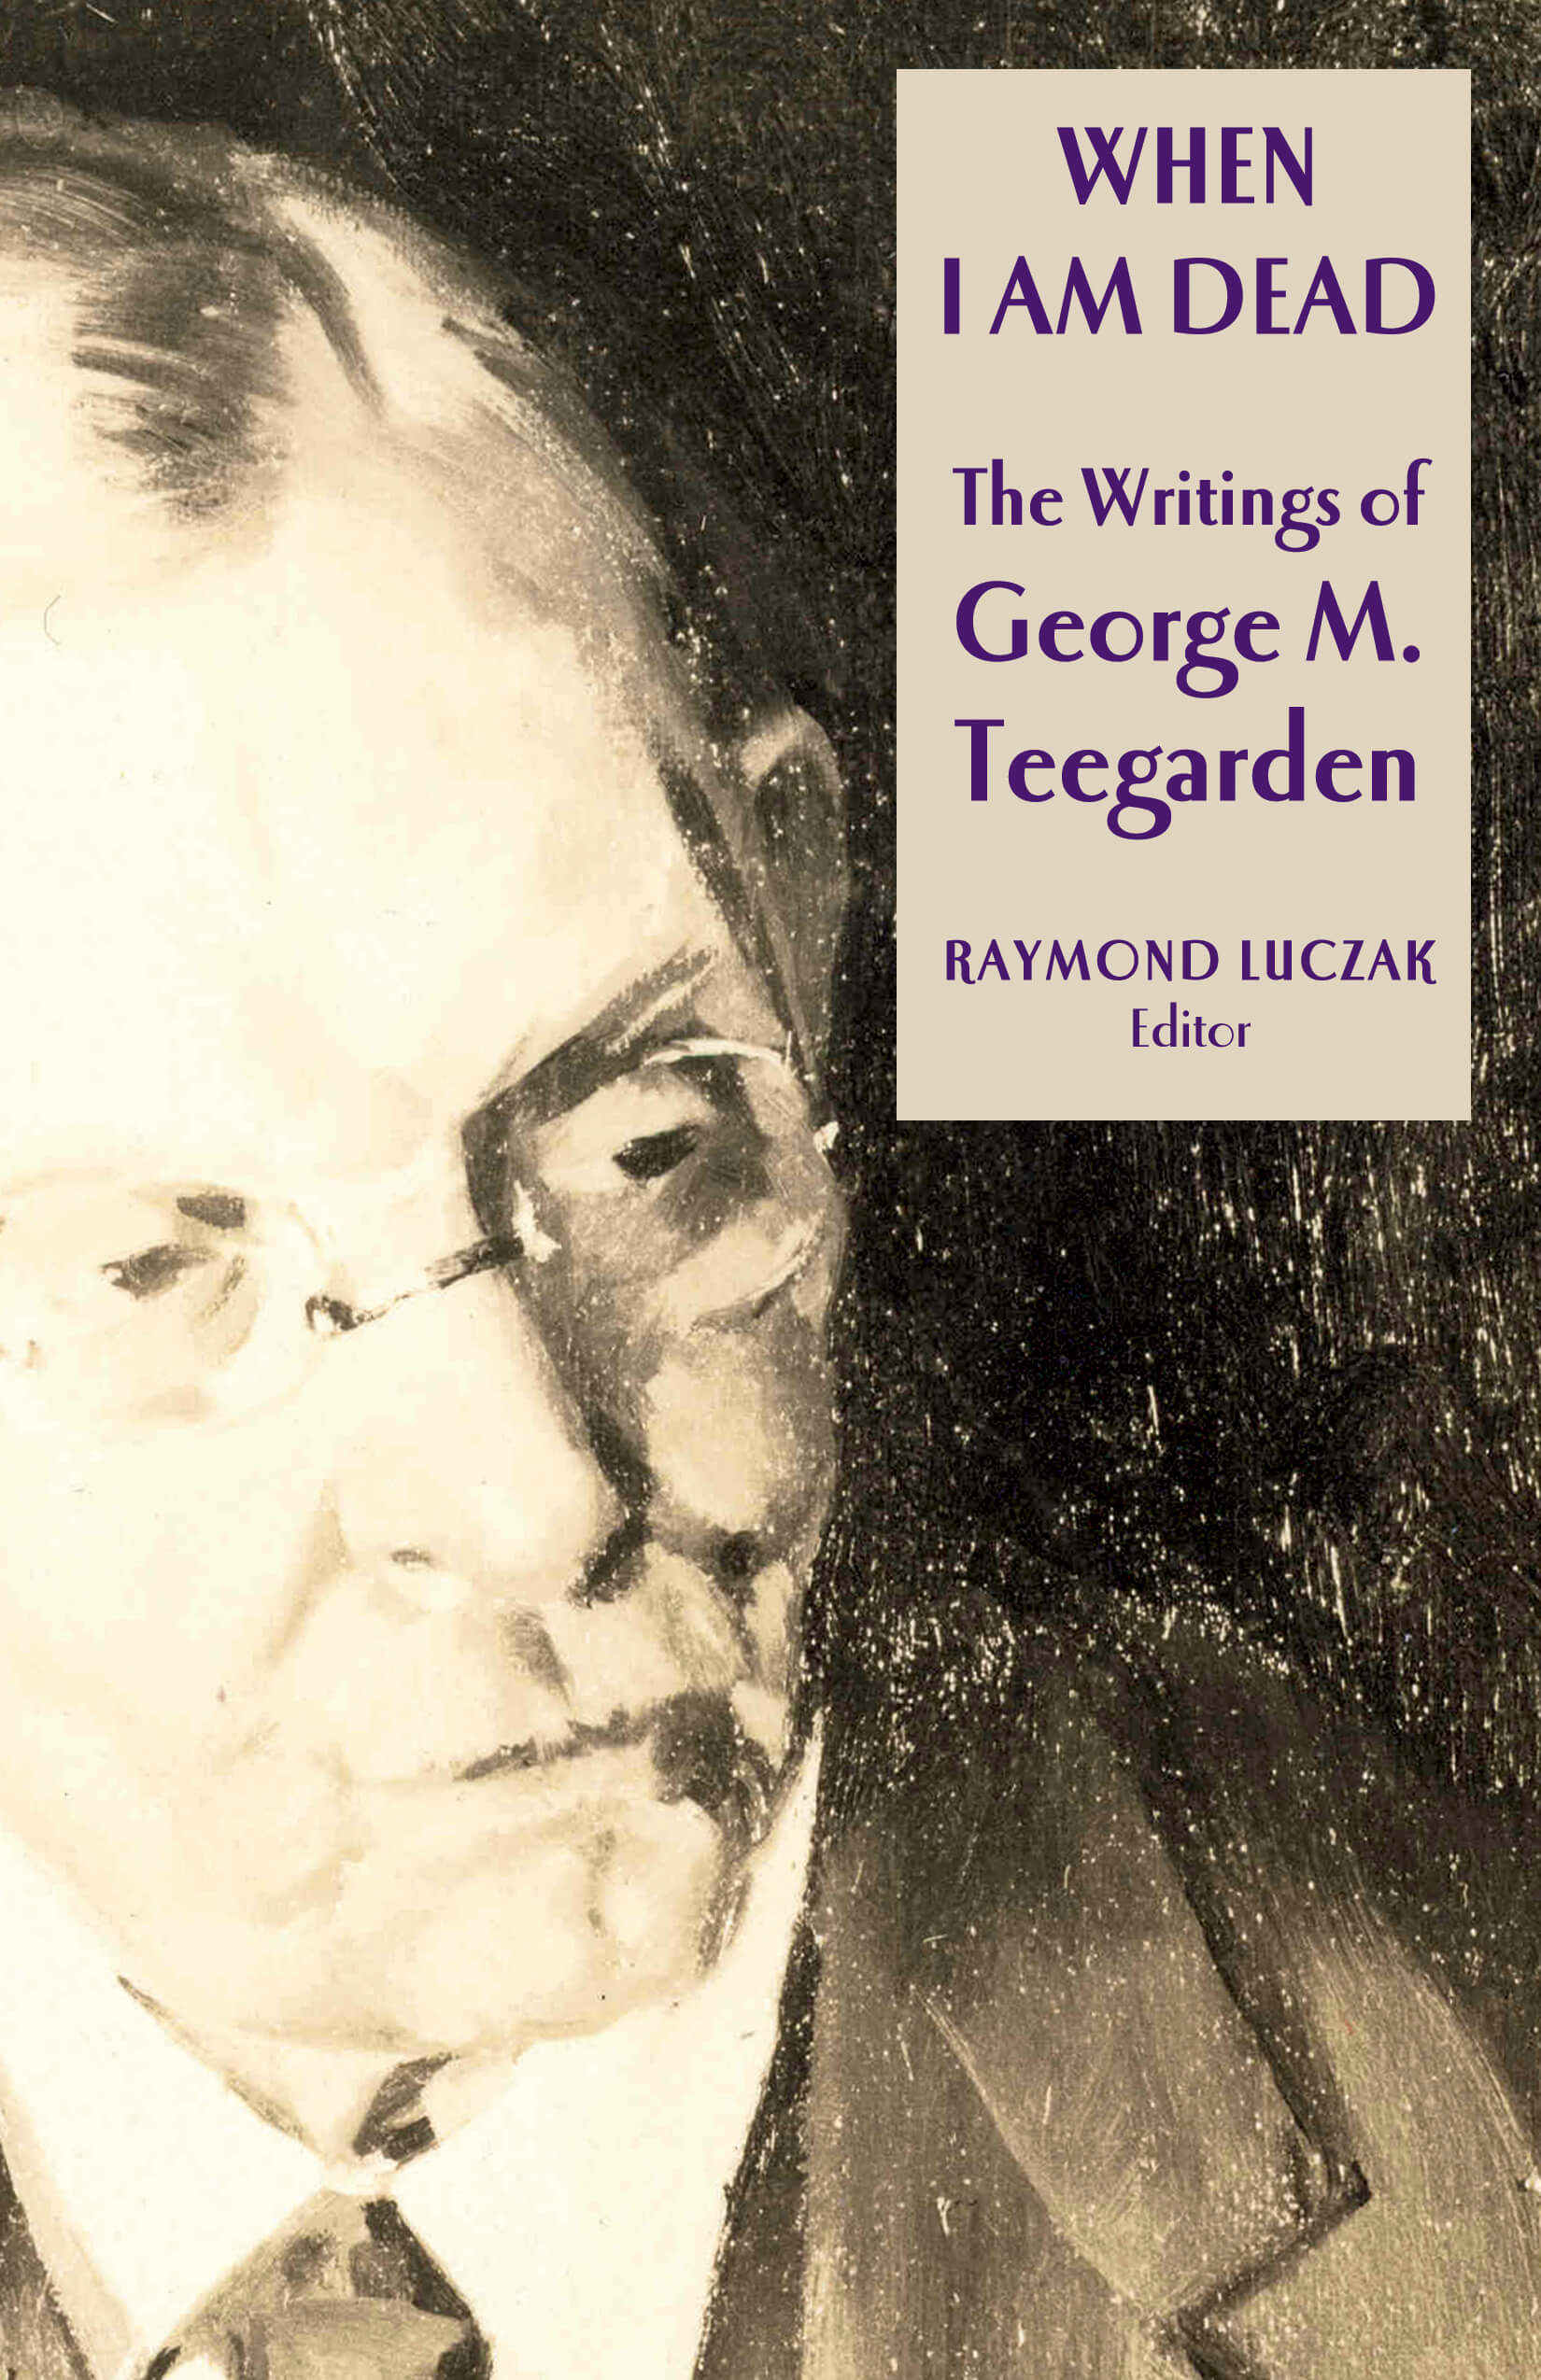 When I am Dead: The Writings of George M. Teegarden